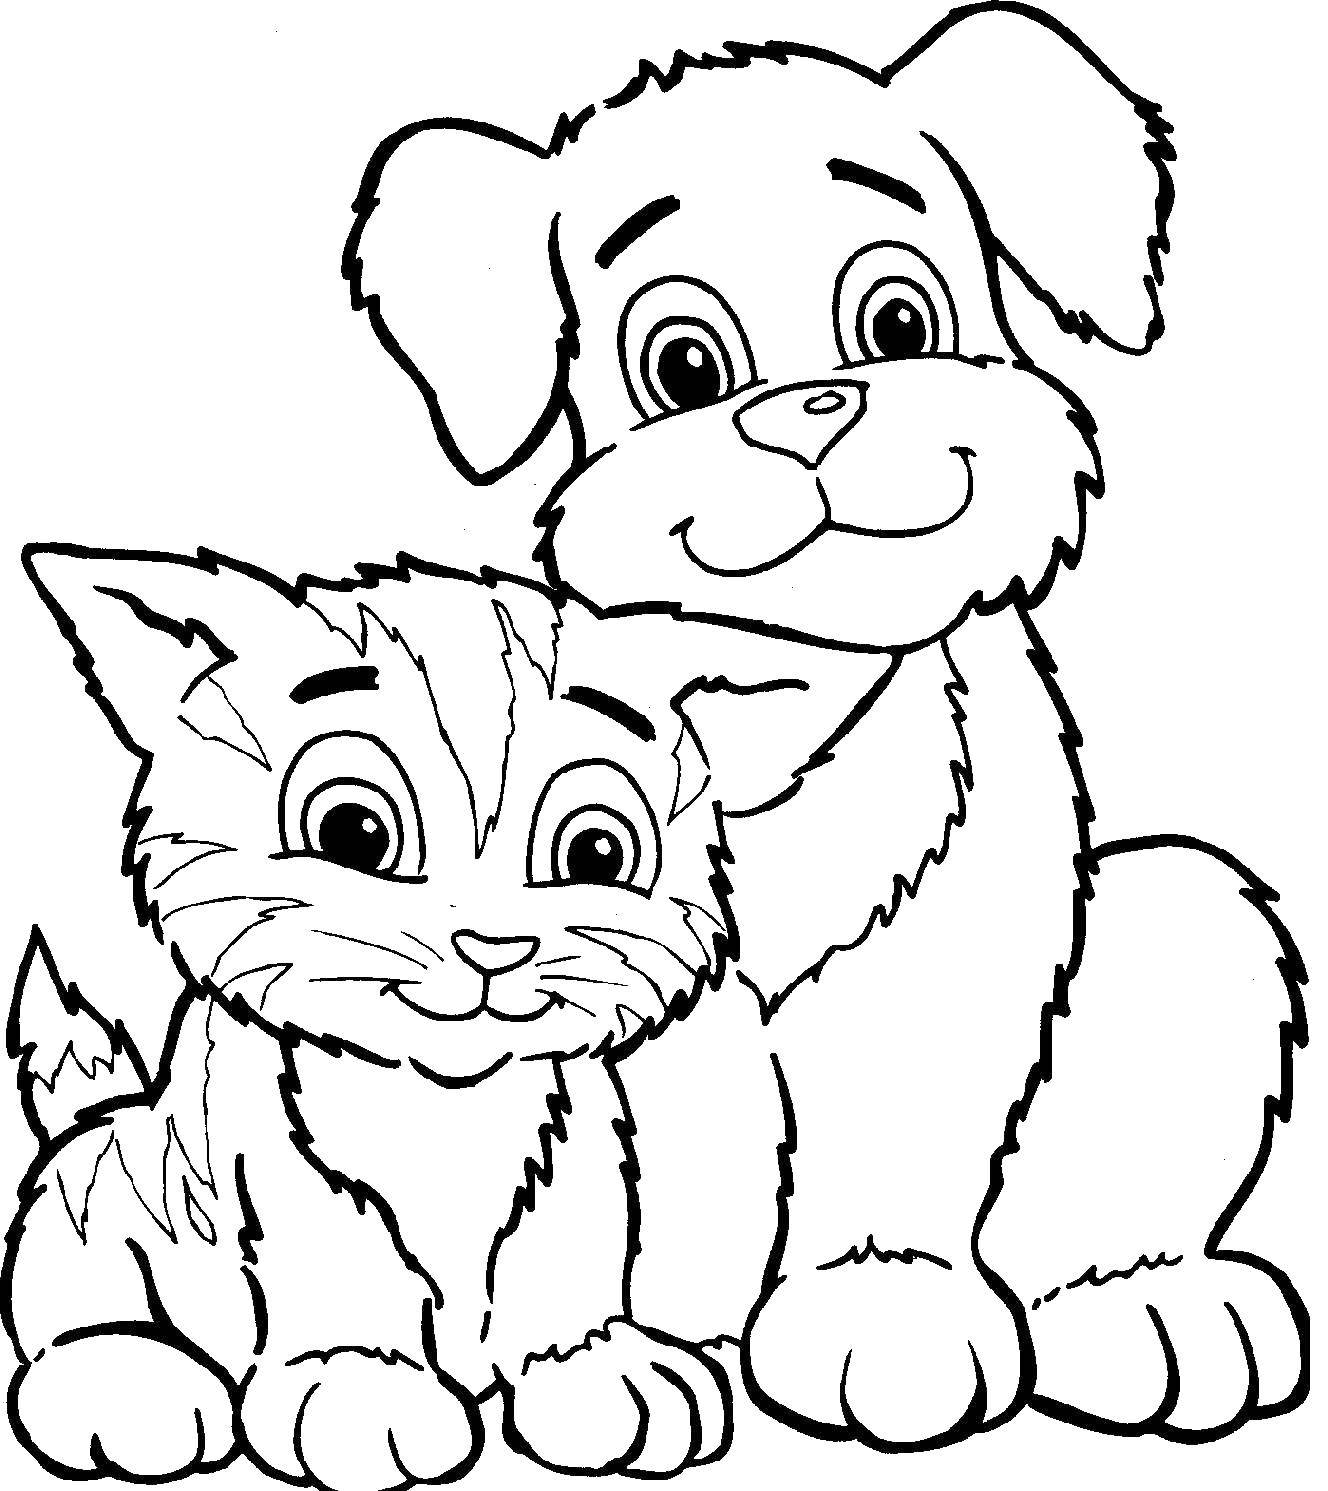 Coloring Cat and dog. Category Animals. Tags:  dog, cat.